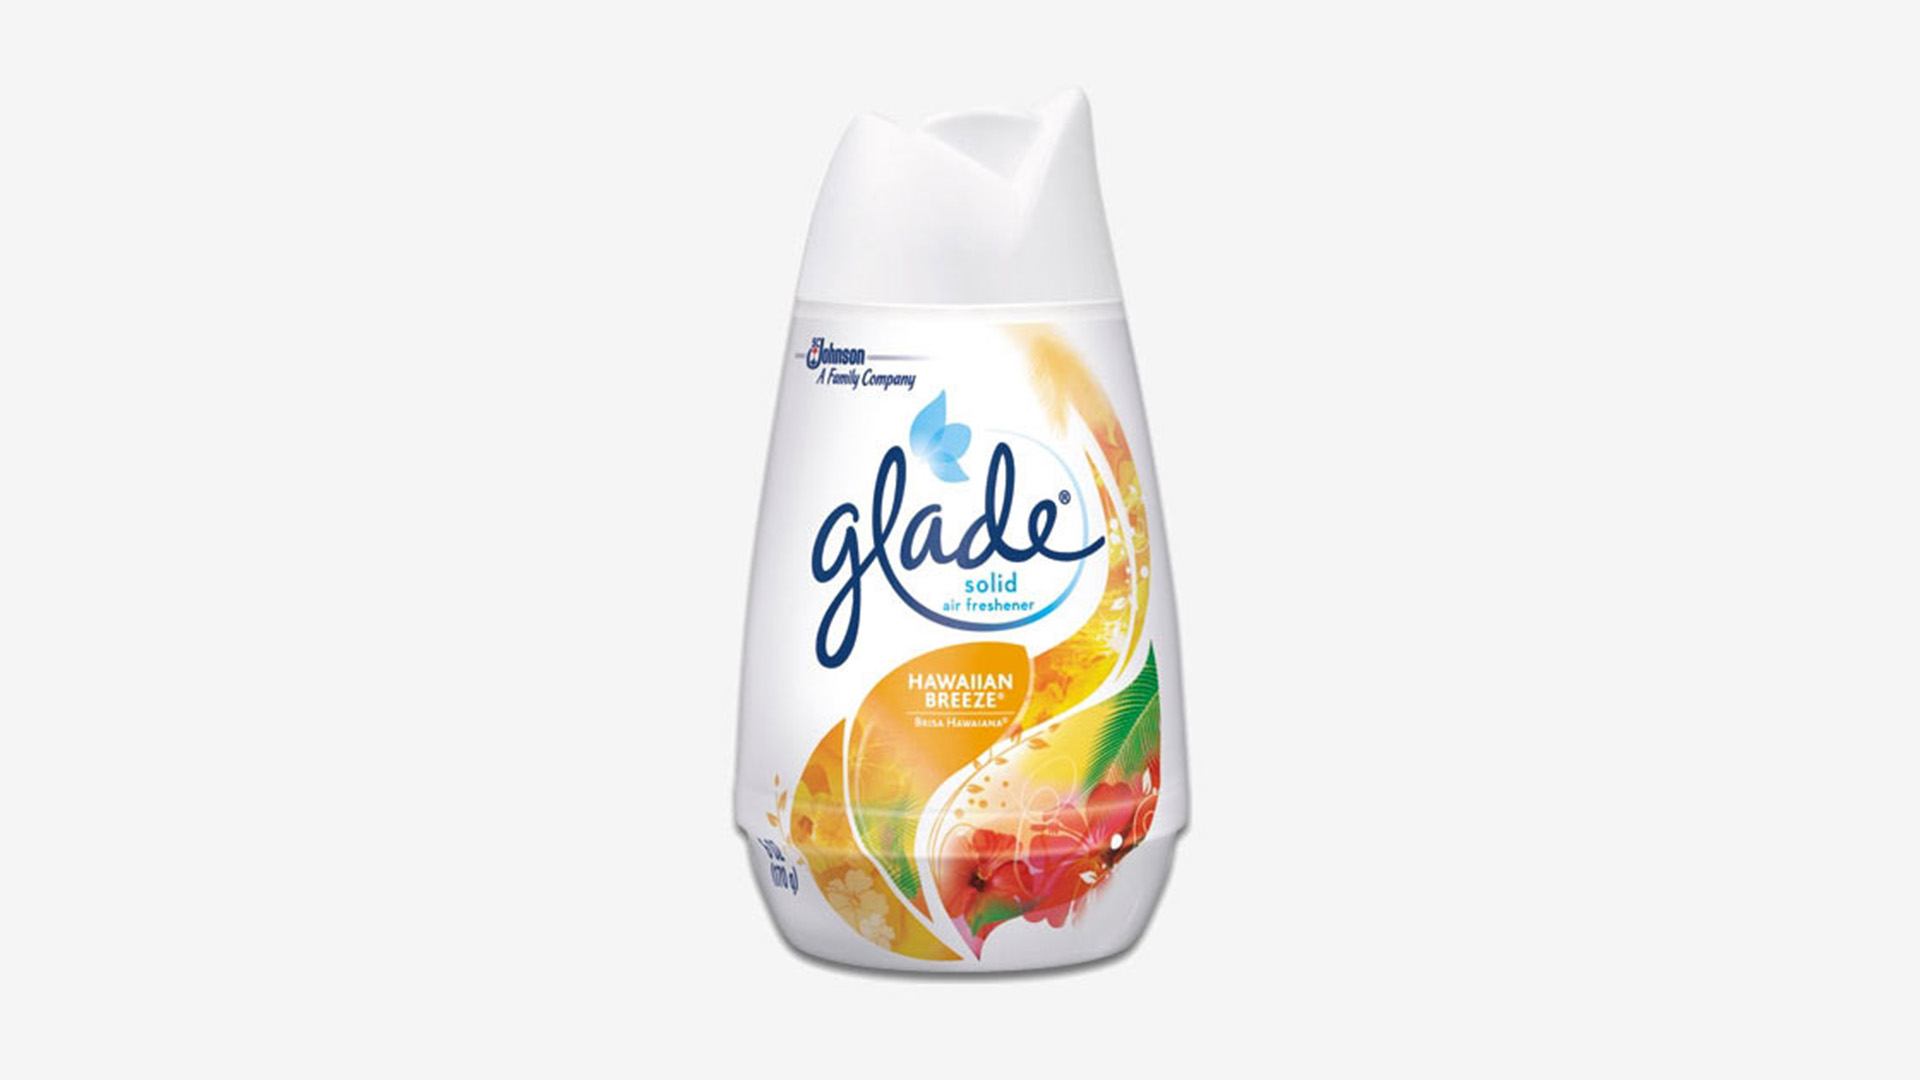 Glade® Solid Air Freshener now uses 16% less plastic.